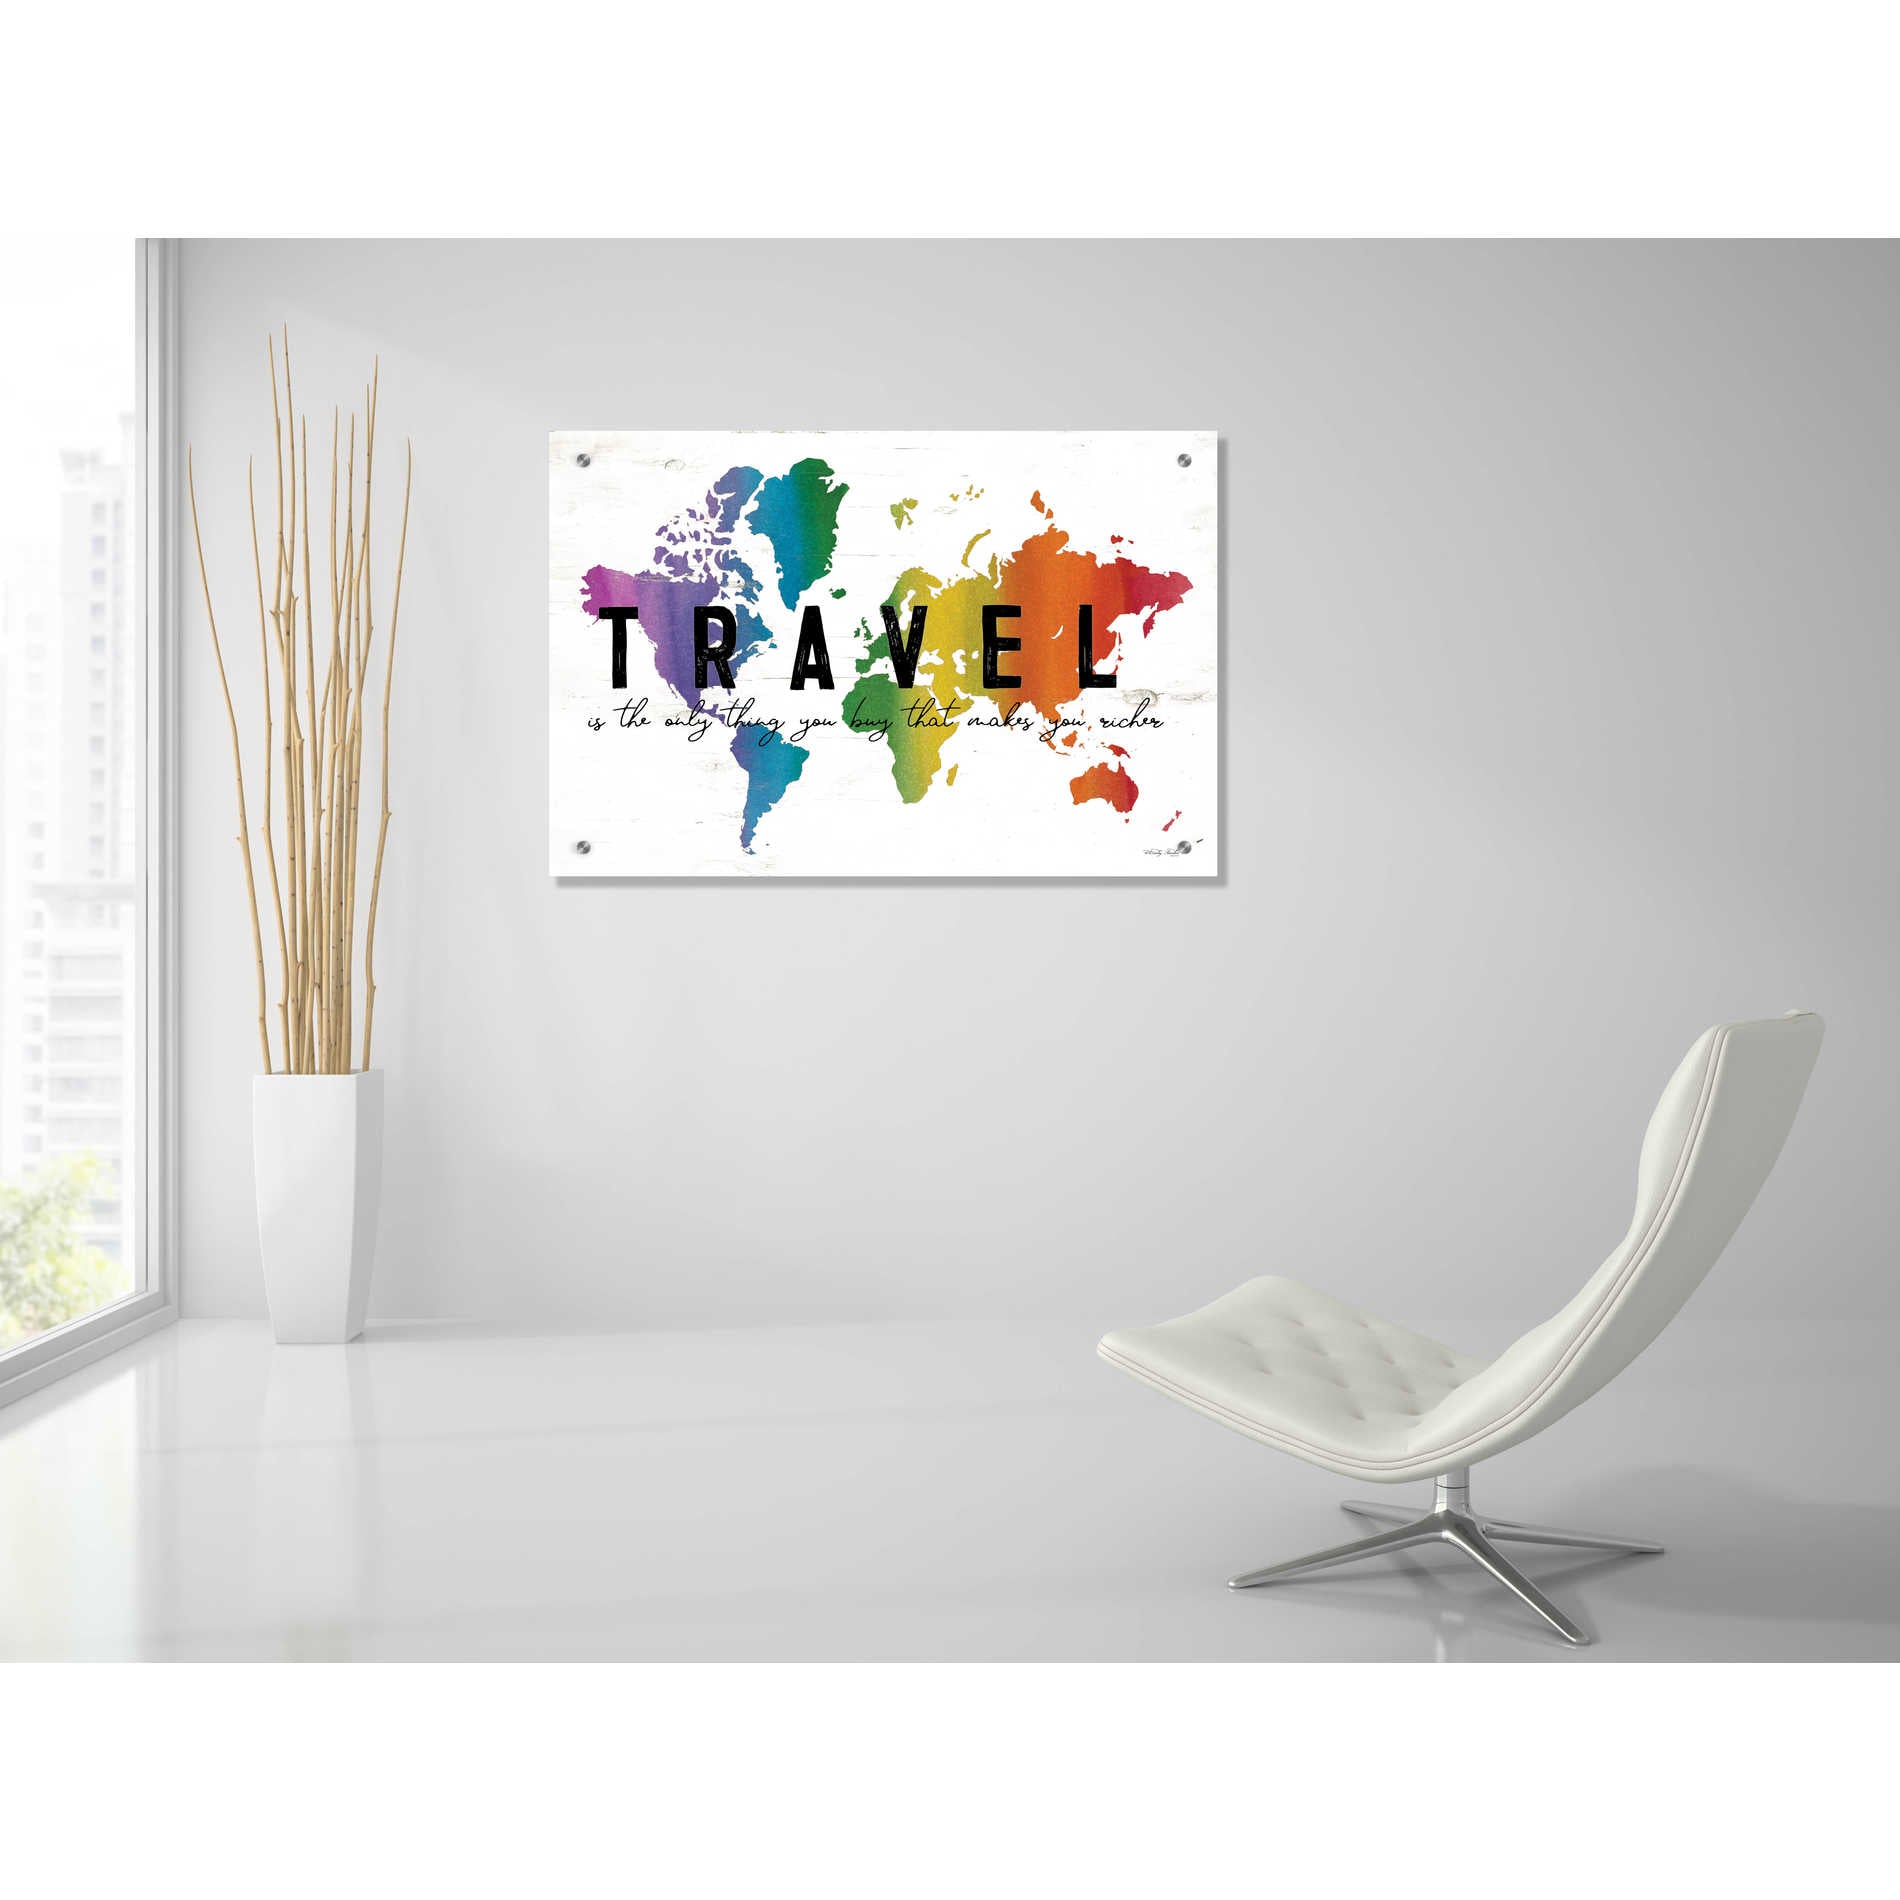 Epic Art 'Travel is the Only thing You Buy' by Cindy Jacobs, Acrylic Glass Wall Art,36x24